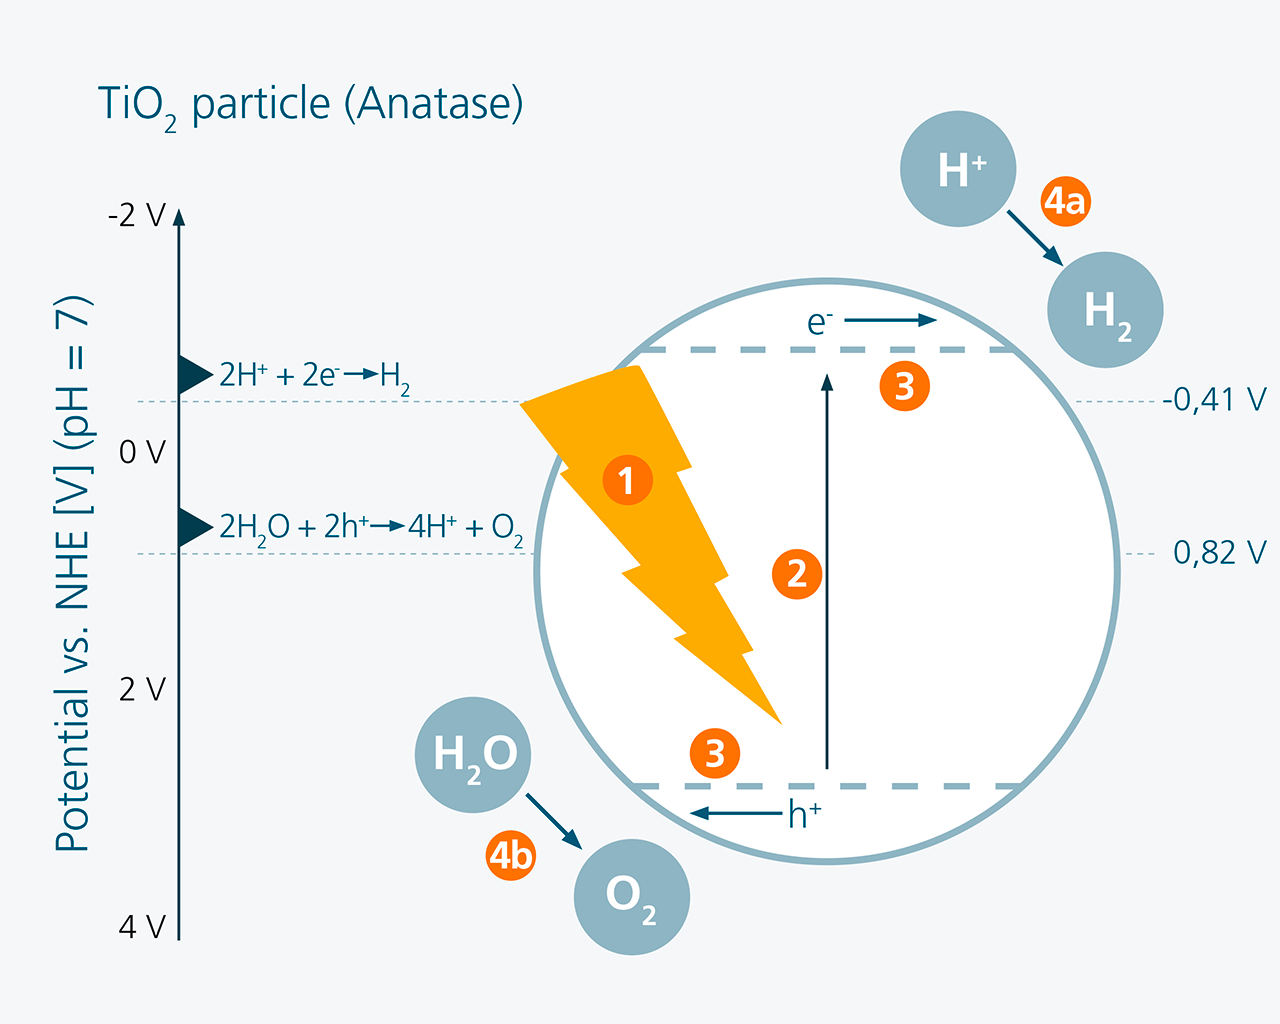 Schematic representation of the processes occurring during water splitting on a semiconducting particle (1 - 4).